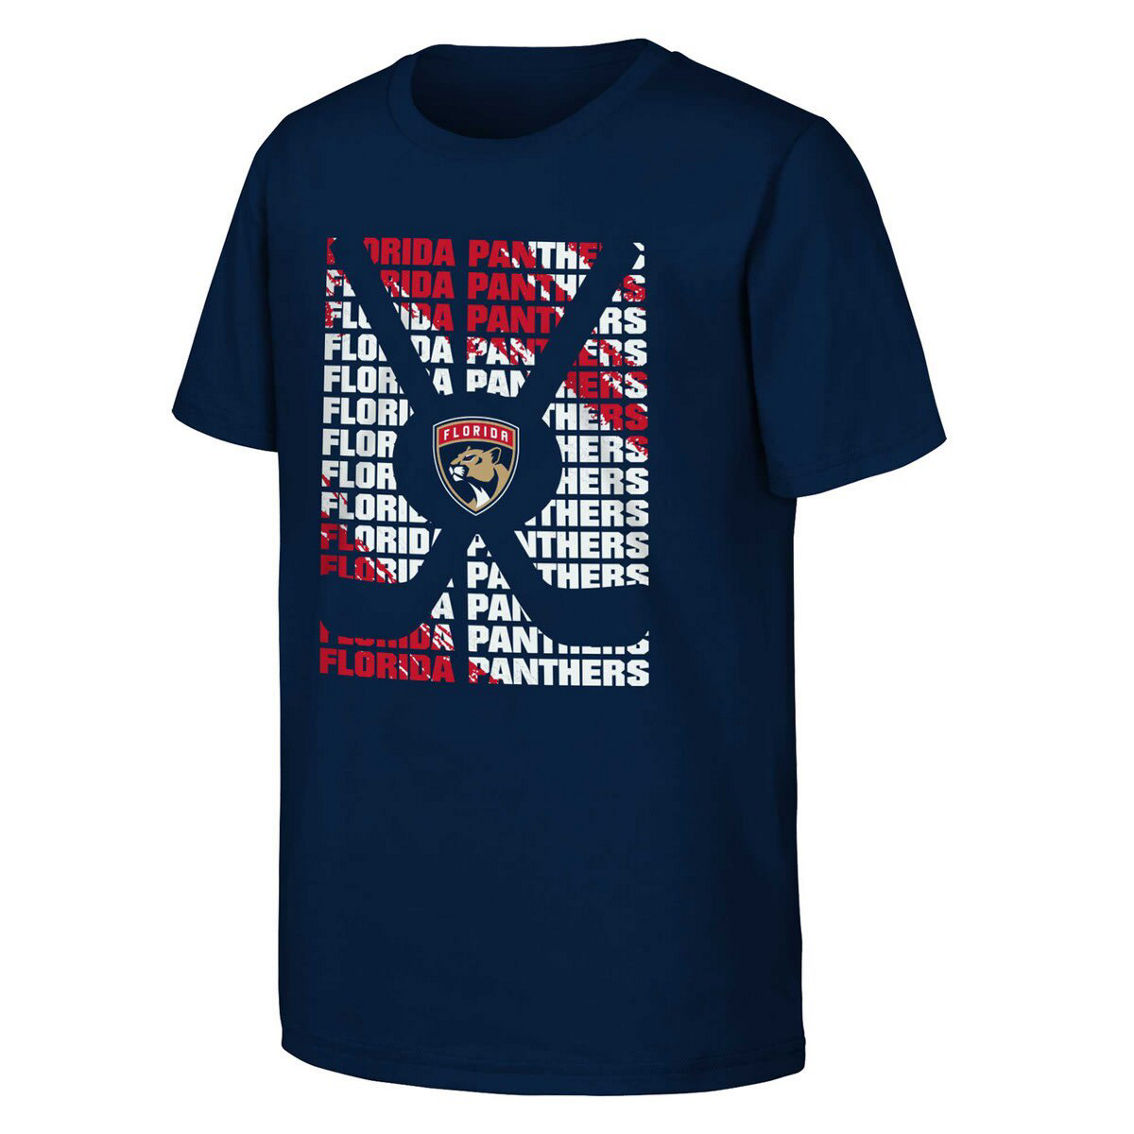 Outerstuff Youth Navy Florida Panthers Box T-Shirt - Image 2 of 2